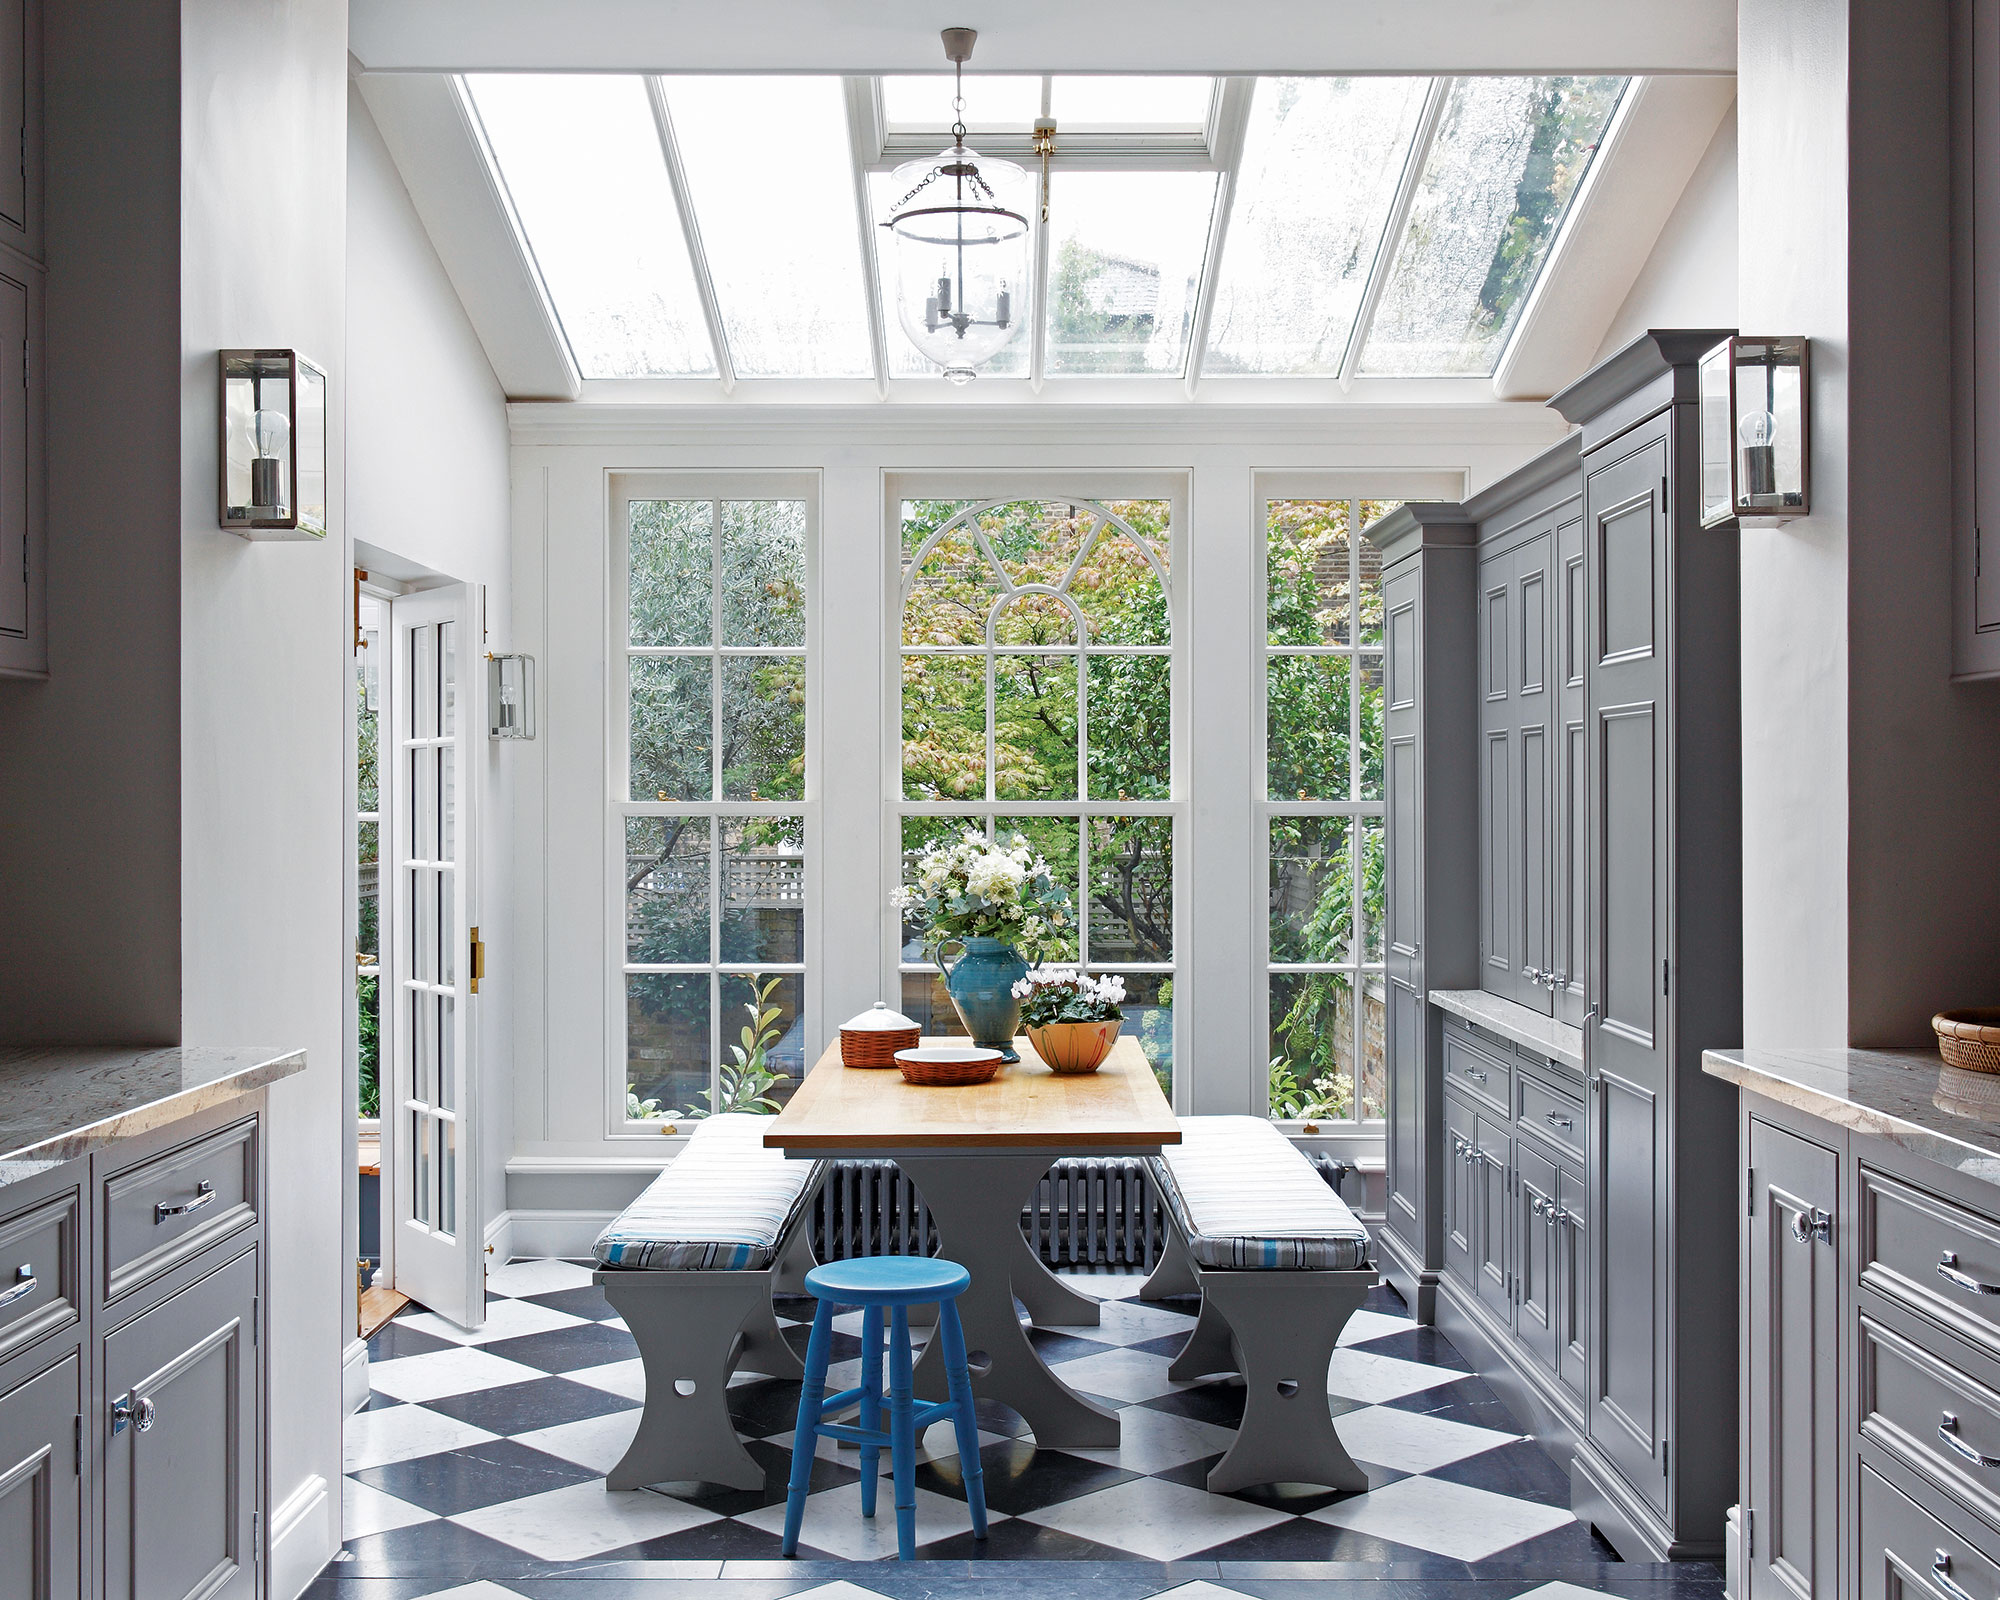 Gray kitchen cabinet colors with a skylight, large windows and dining area.